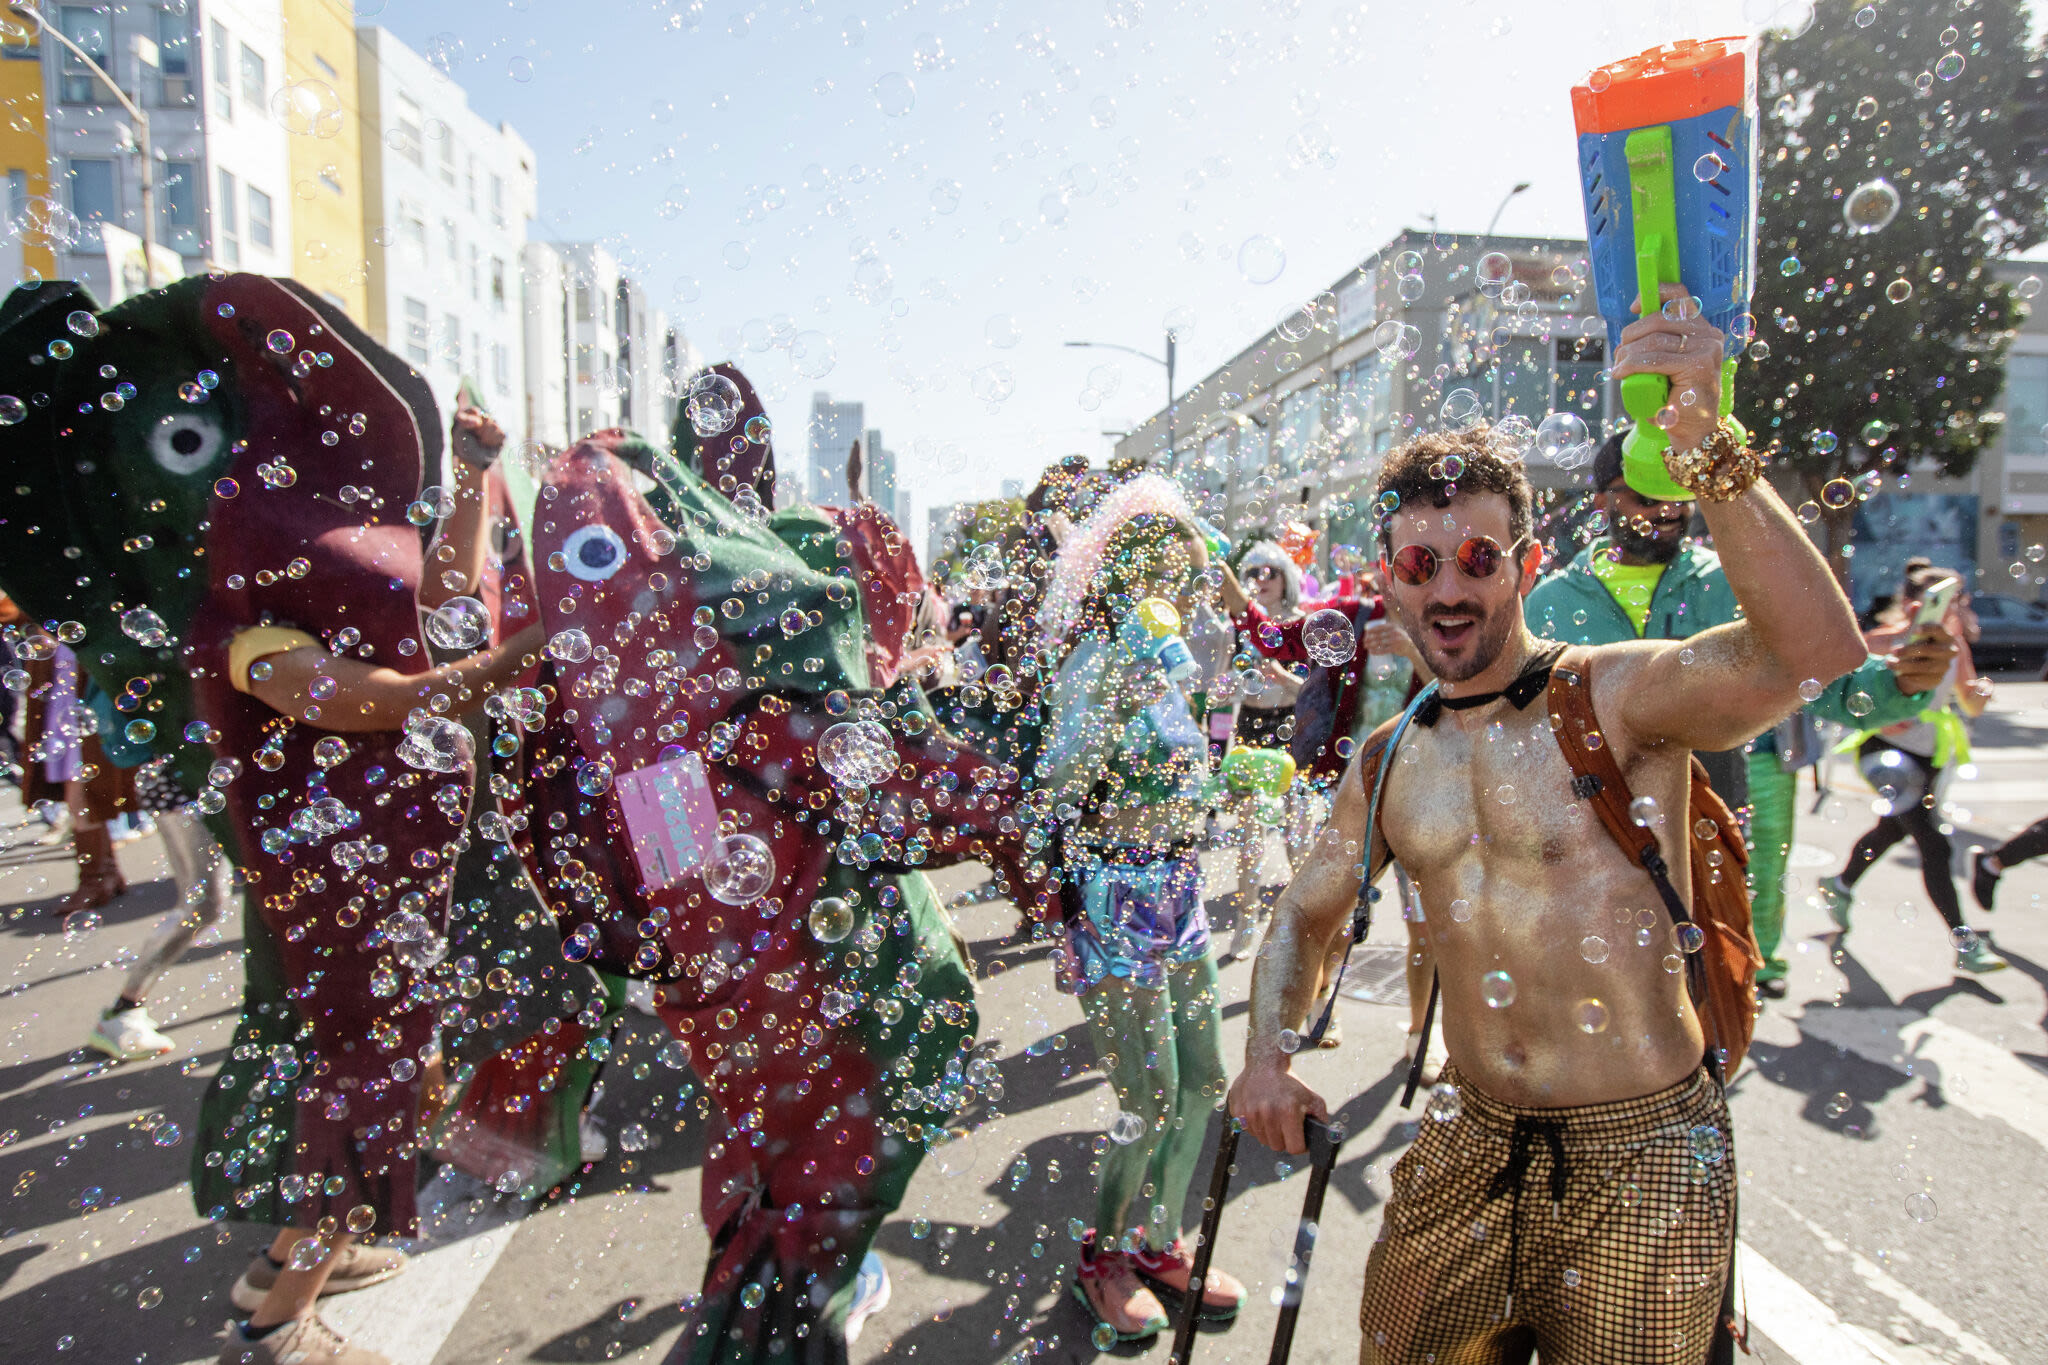 Bay to Breakers race takes over San Francisco's streets